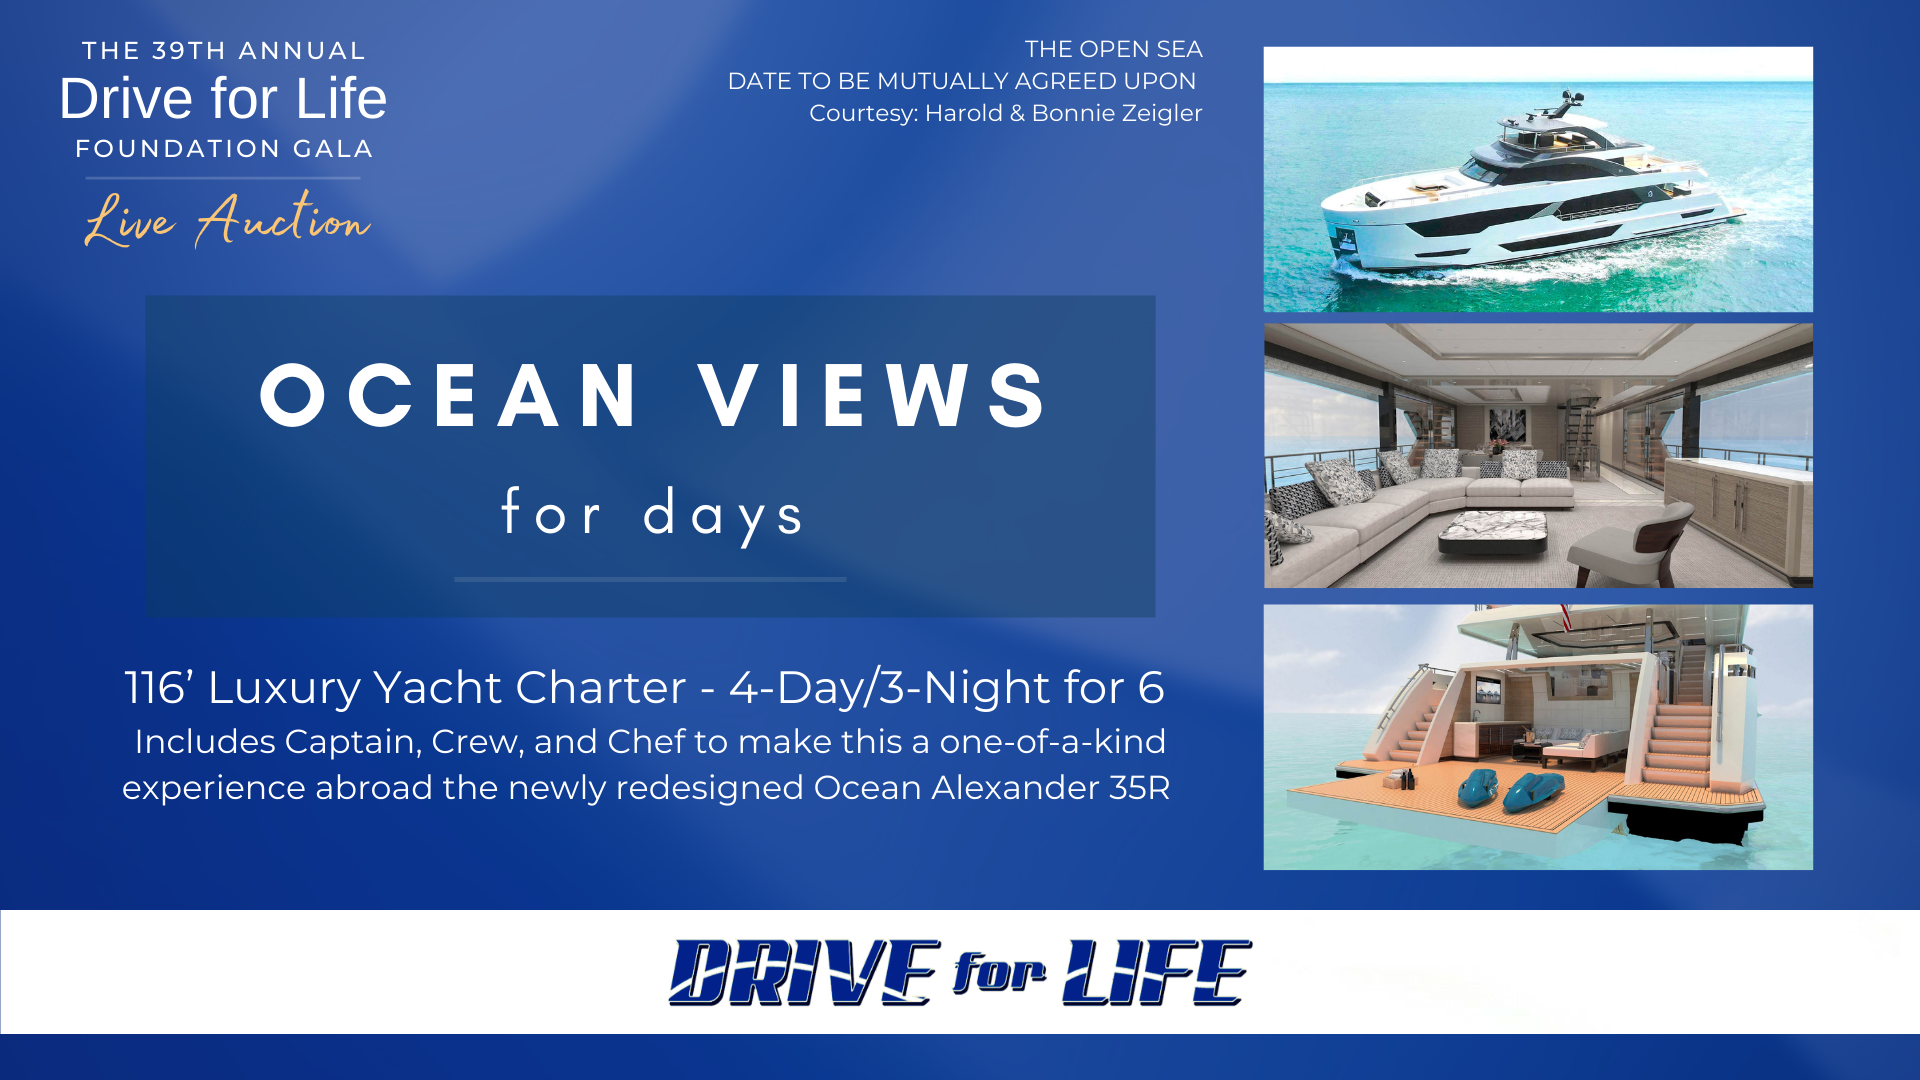 LIVE AUCTION EXPERIENCE: Ocean Views for Days - Available at the 39th Annual Drive for Life Foundation Monday, September 13, 2021 at 6:30 p.m. at the Radisson Plaza Hotel in Kalamazoo, Mich.